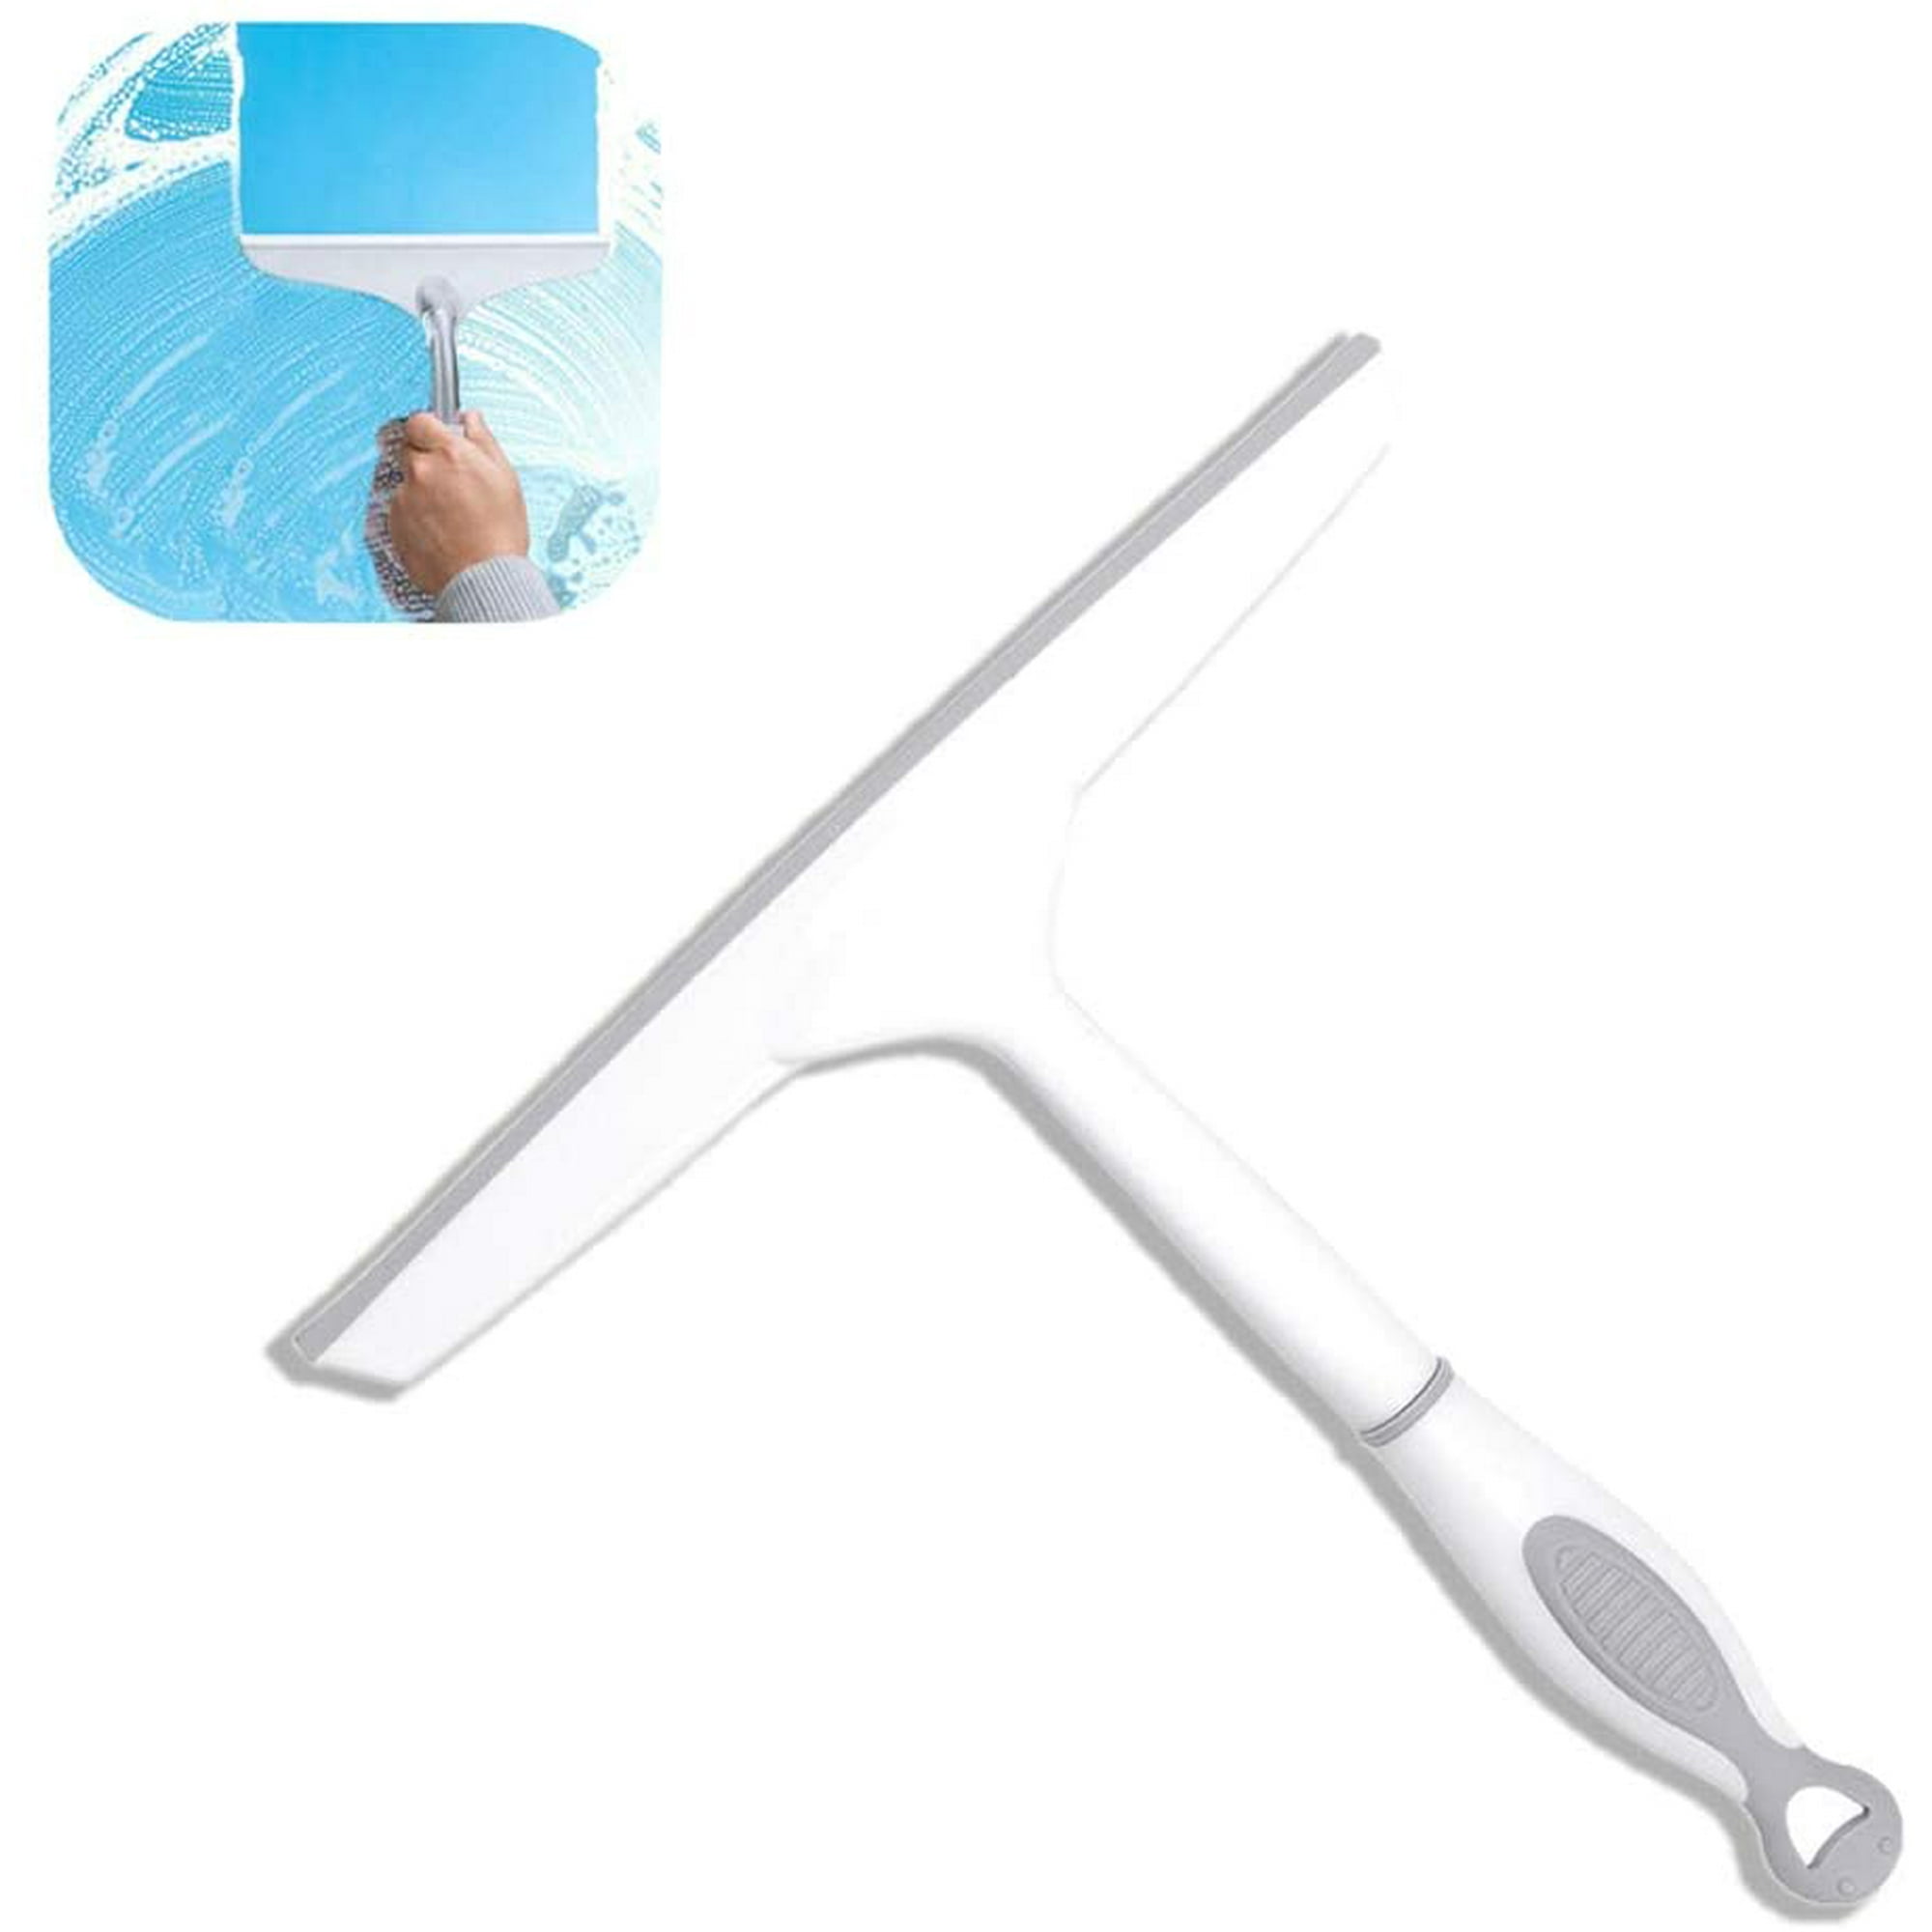 Shower Glass Wiper, Universal Wall Mounted Shower Squeegee, Non-marking Glass  Cleaner, Used For Mirror, Tile Cleaning, Off-white